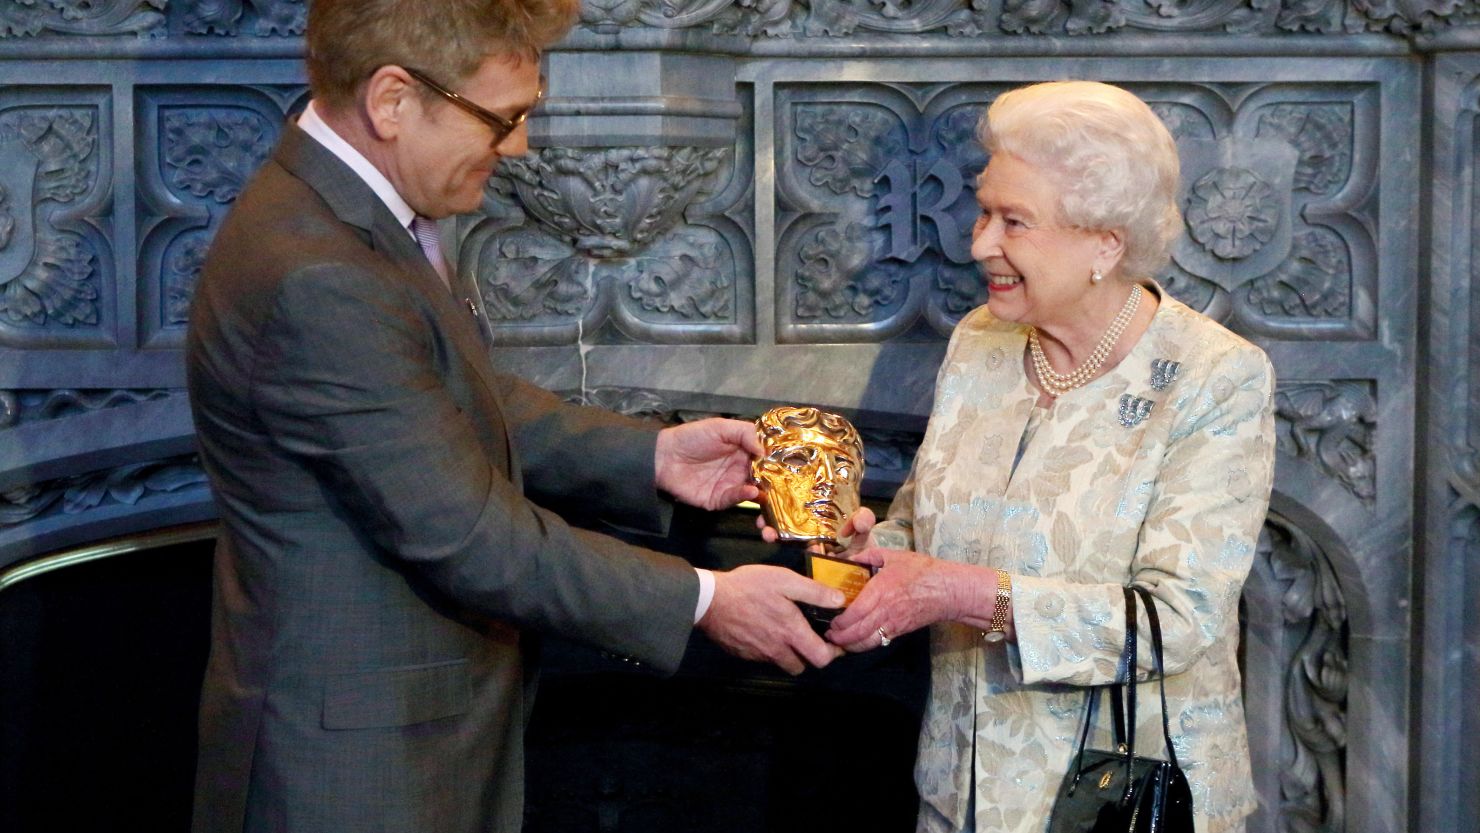 Queen Elizabeth II receives an honorary Bafta from actor and director Kenneth Branagh in recognition of a lifetime's support of British film and television on April 4, 2013.